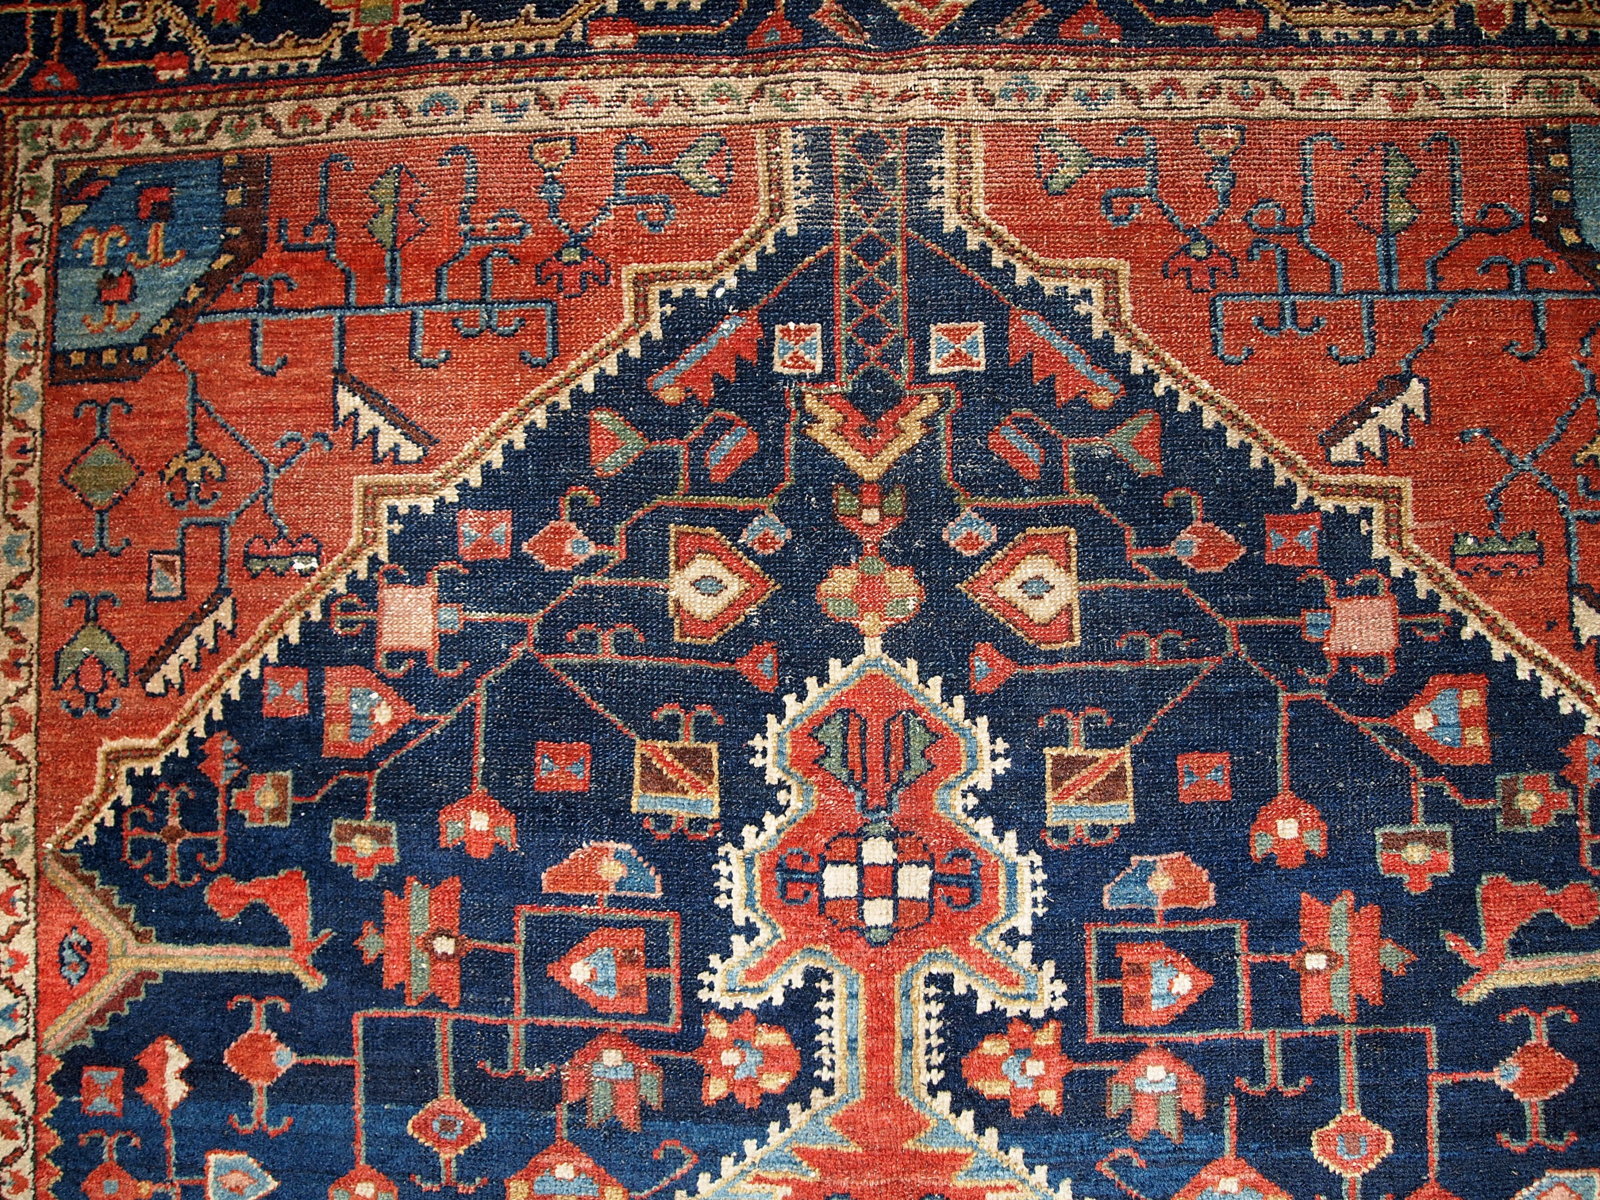 Antique handmade Malayer rug in navy blue and red shades. This rug is in original good condition.